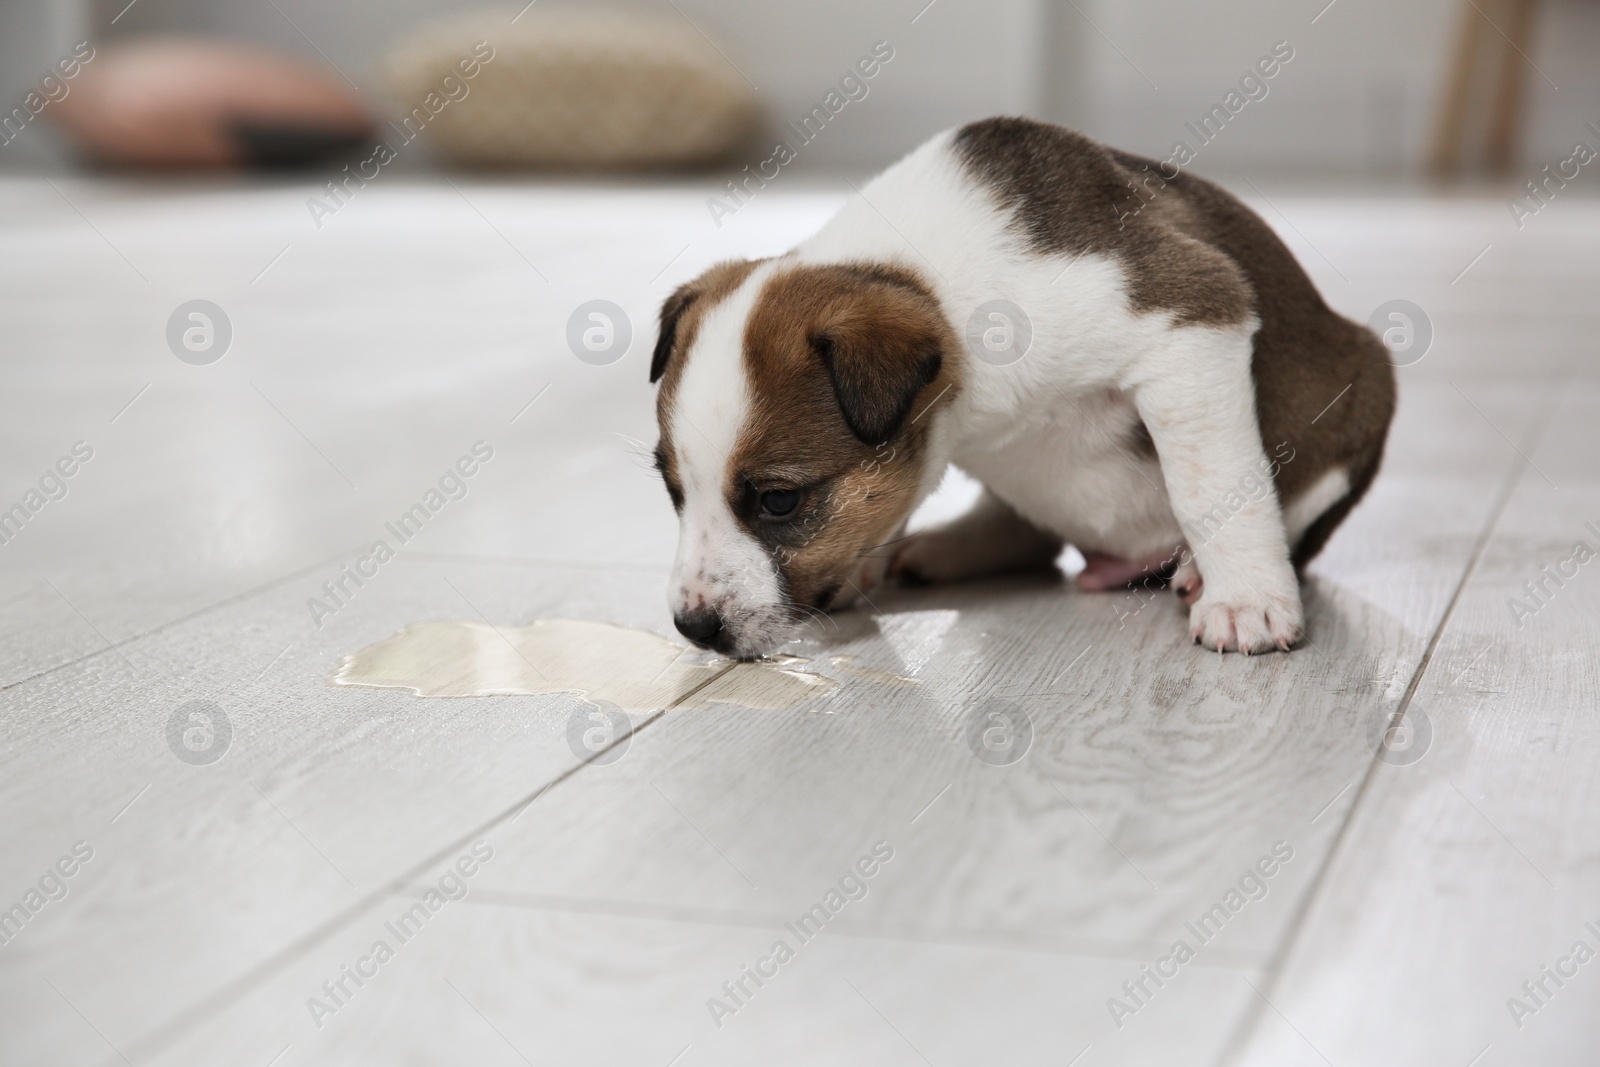 Photo of Adorable puppy near puddle on floor indoors